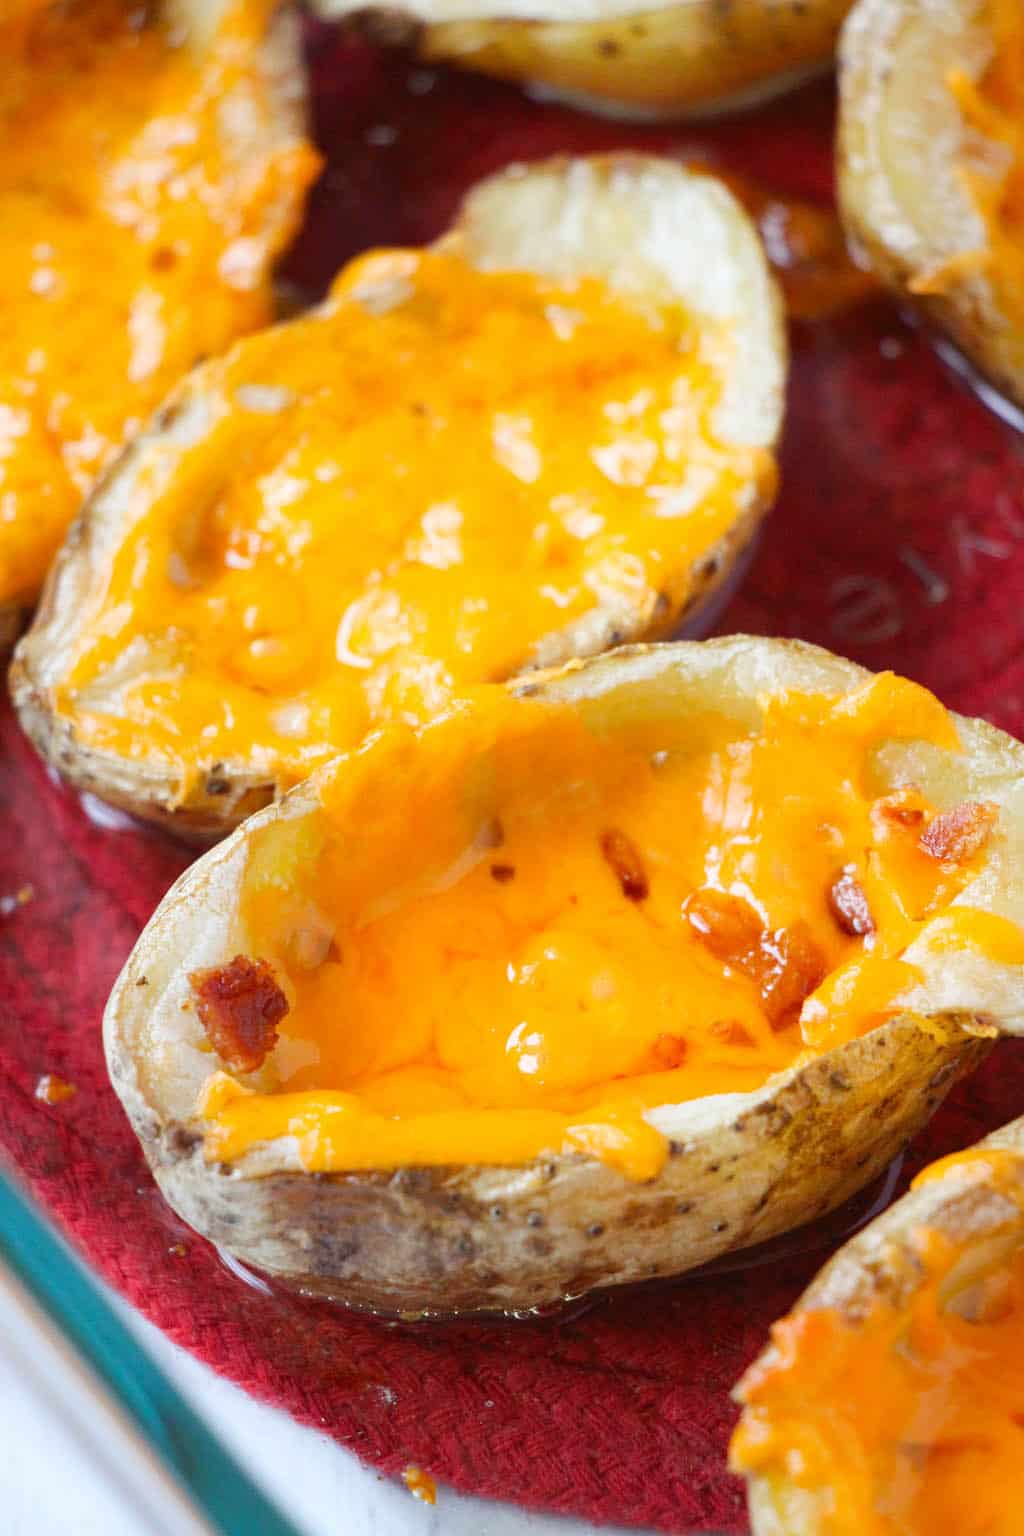 Homemade crispy, cheesy, baked potato skins are the perfect loaded appetizer for any get together that your family and friends will love topped with cheese, bacon, and sour cream.